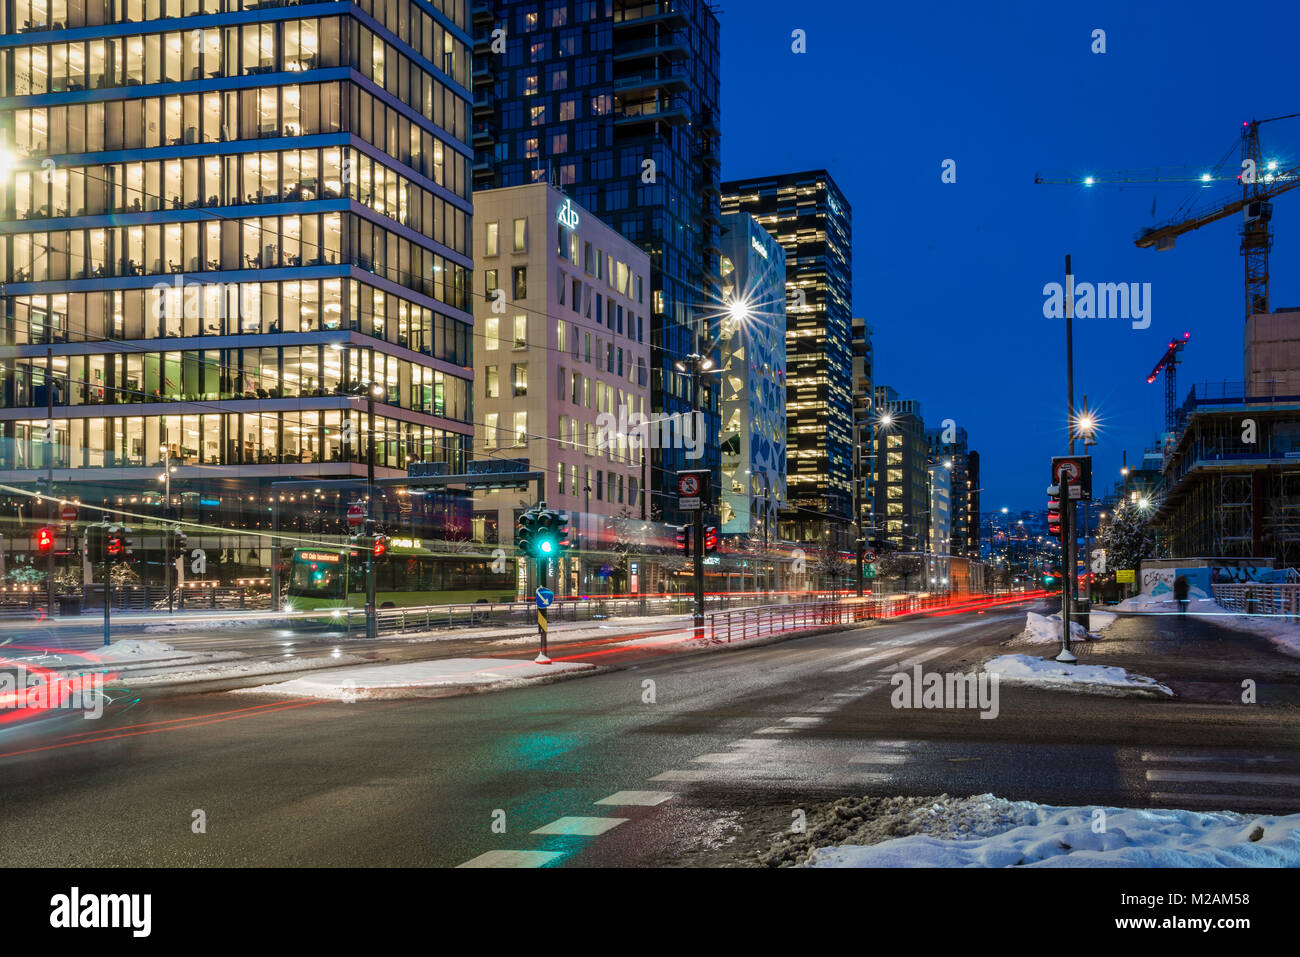 The barcode, a new business district in central Oslo Norway Stock Photo